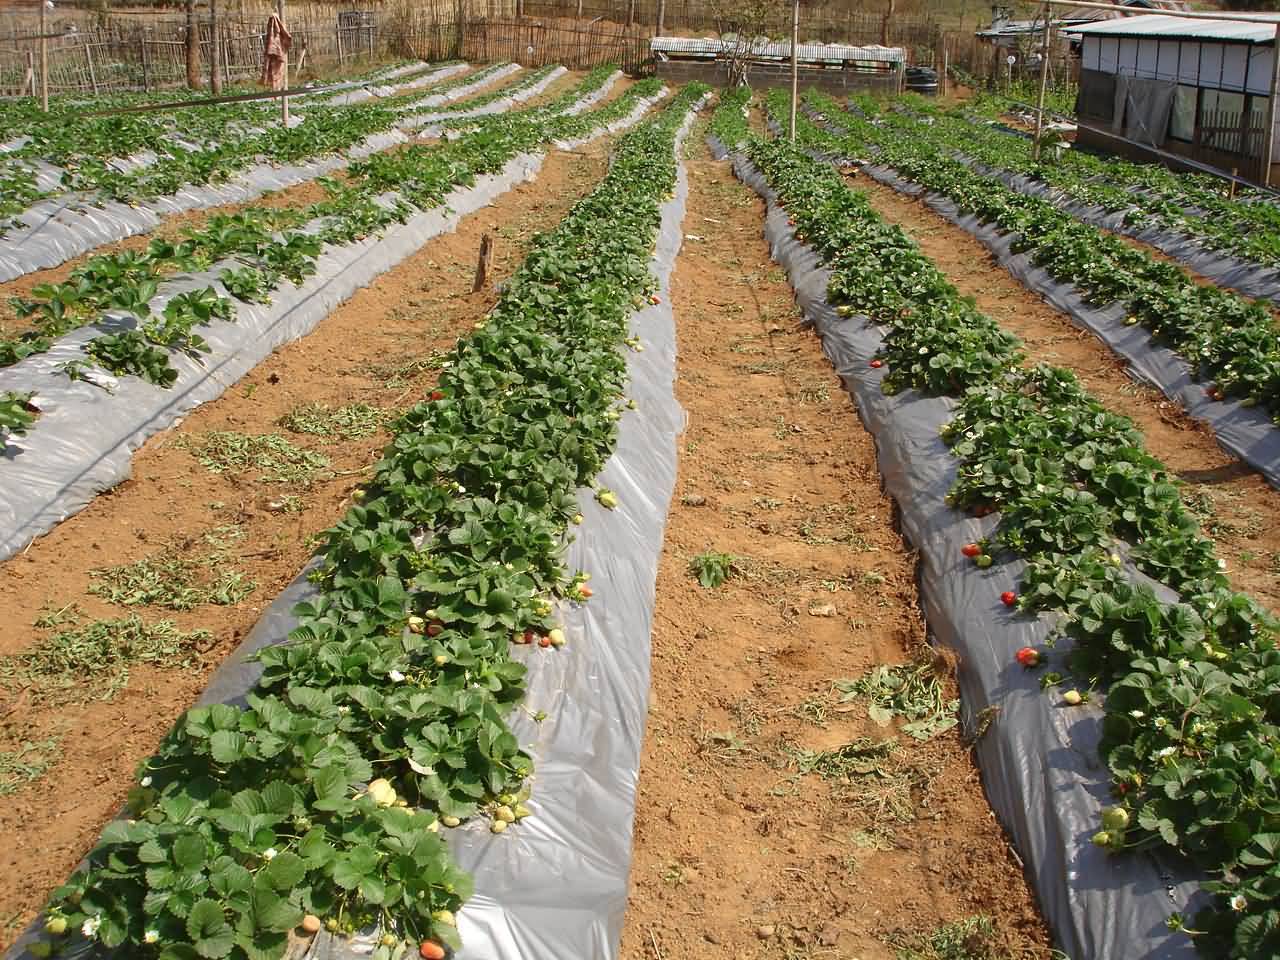 Hill row system of growing Strawberry